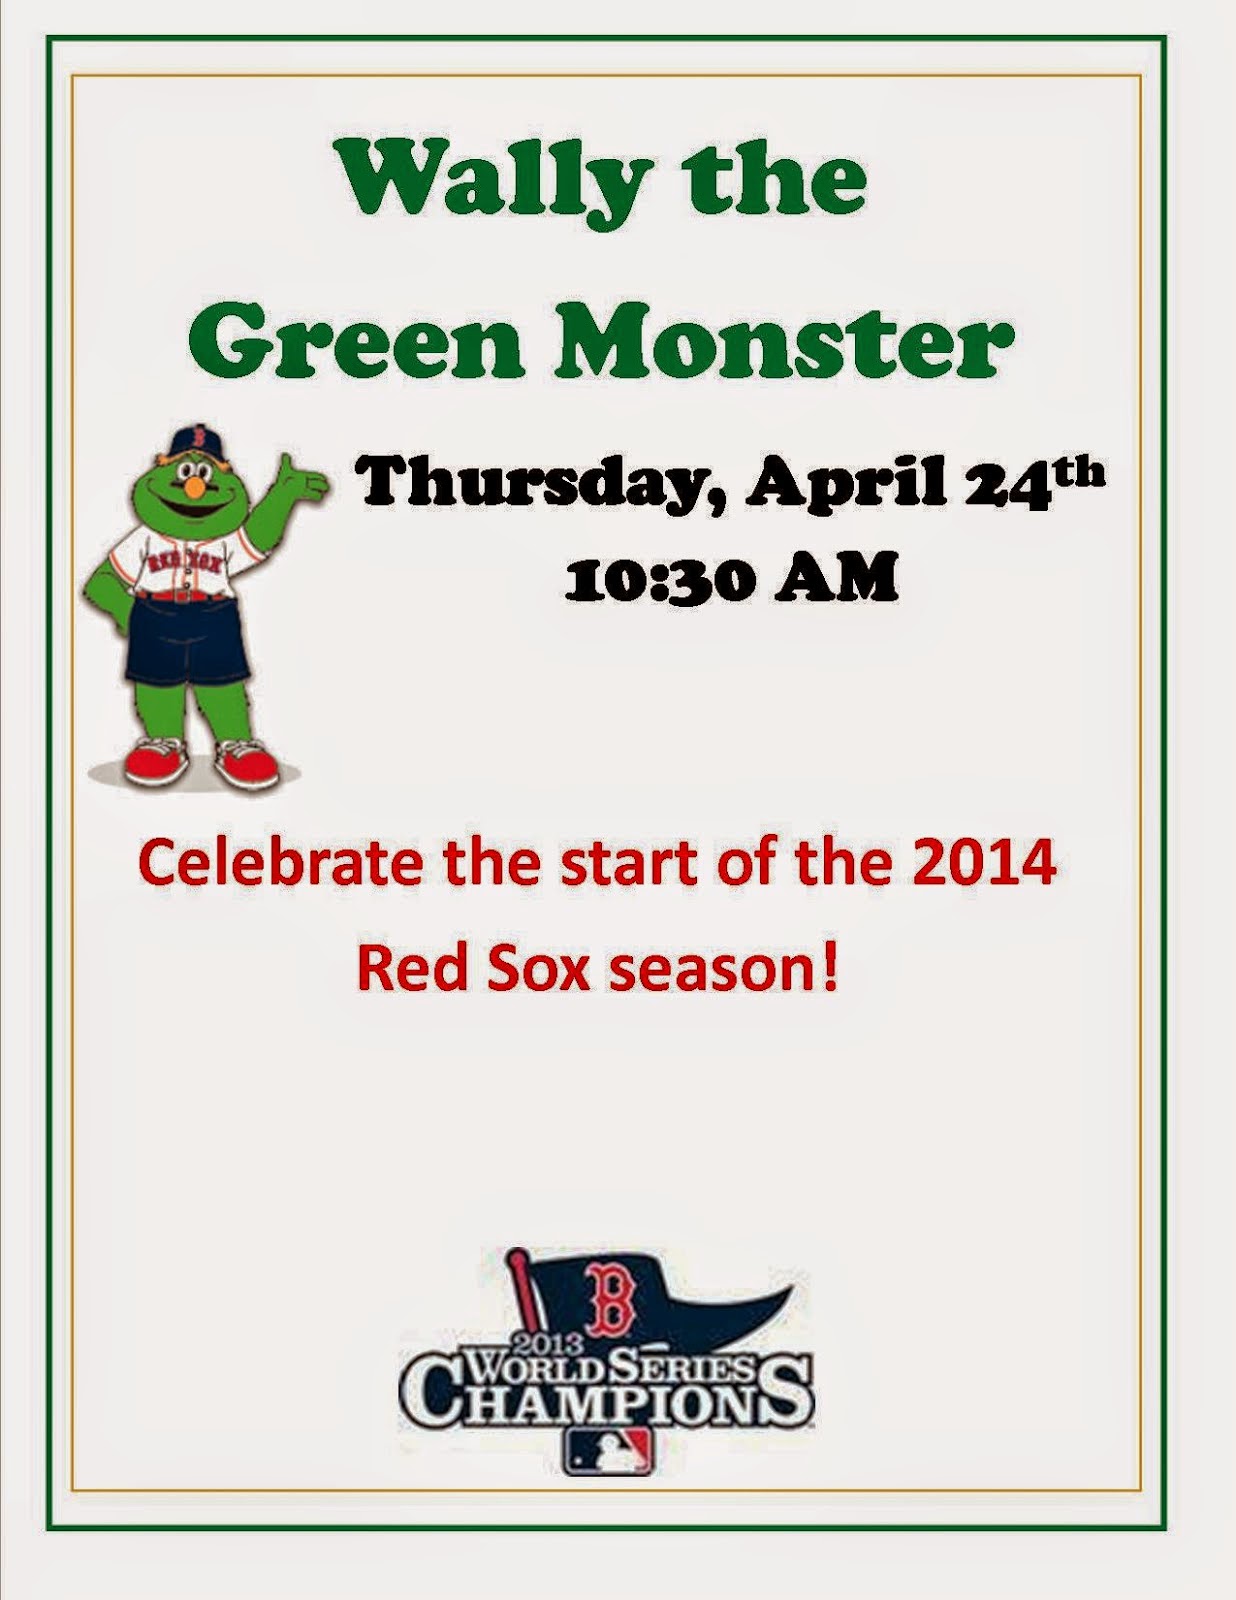 Wally the Green Monster